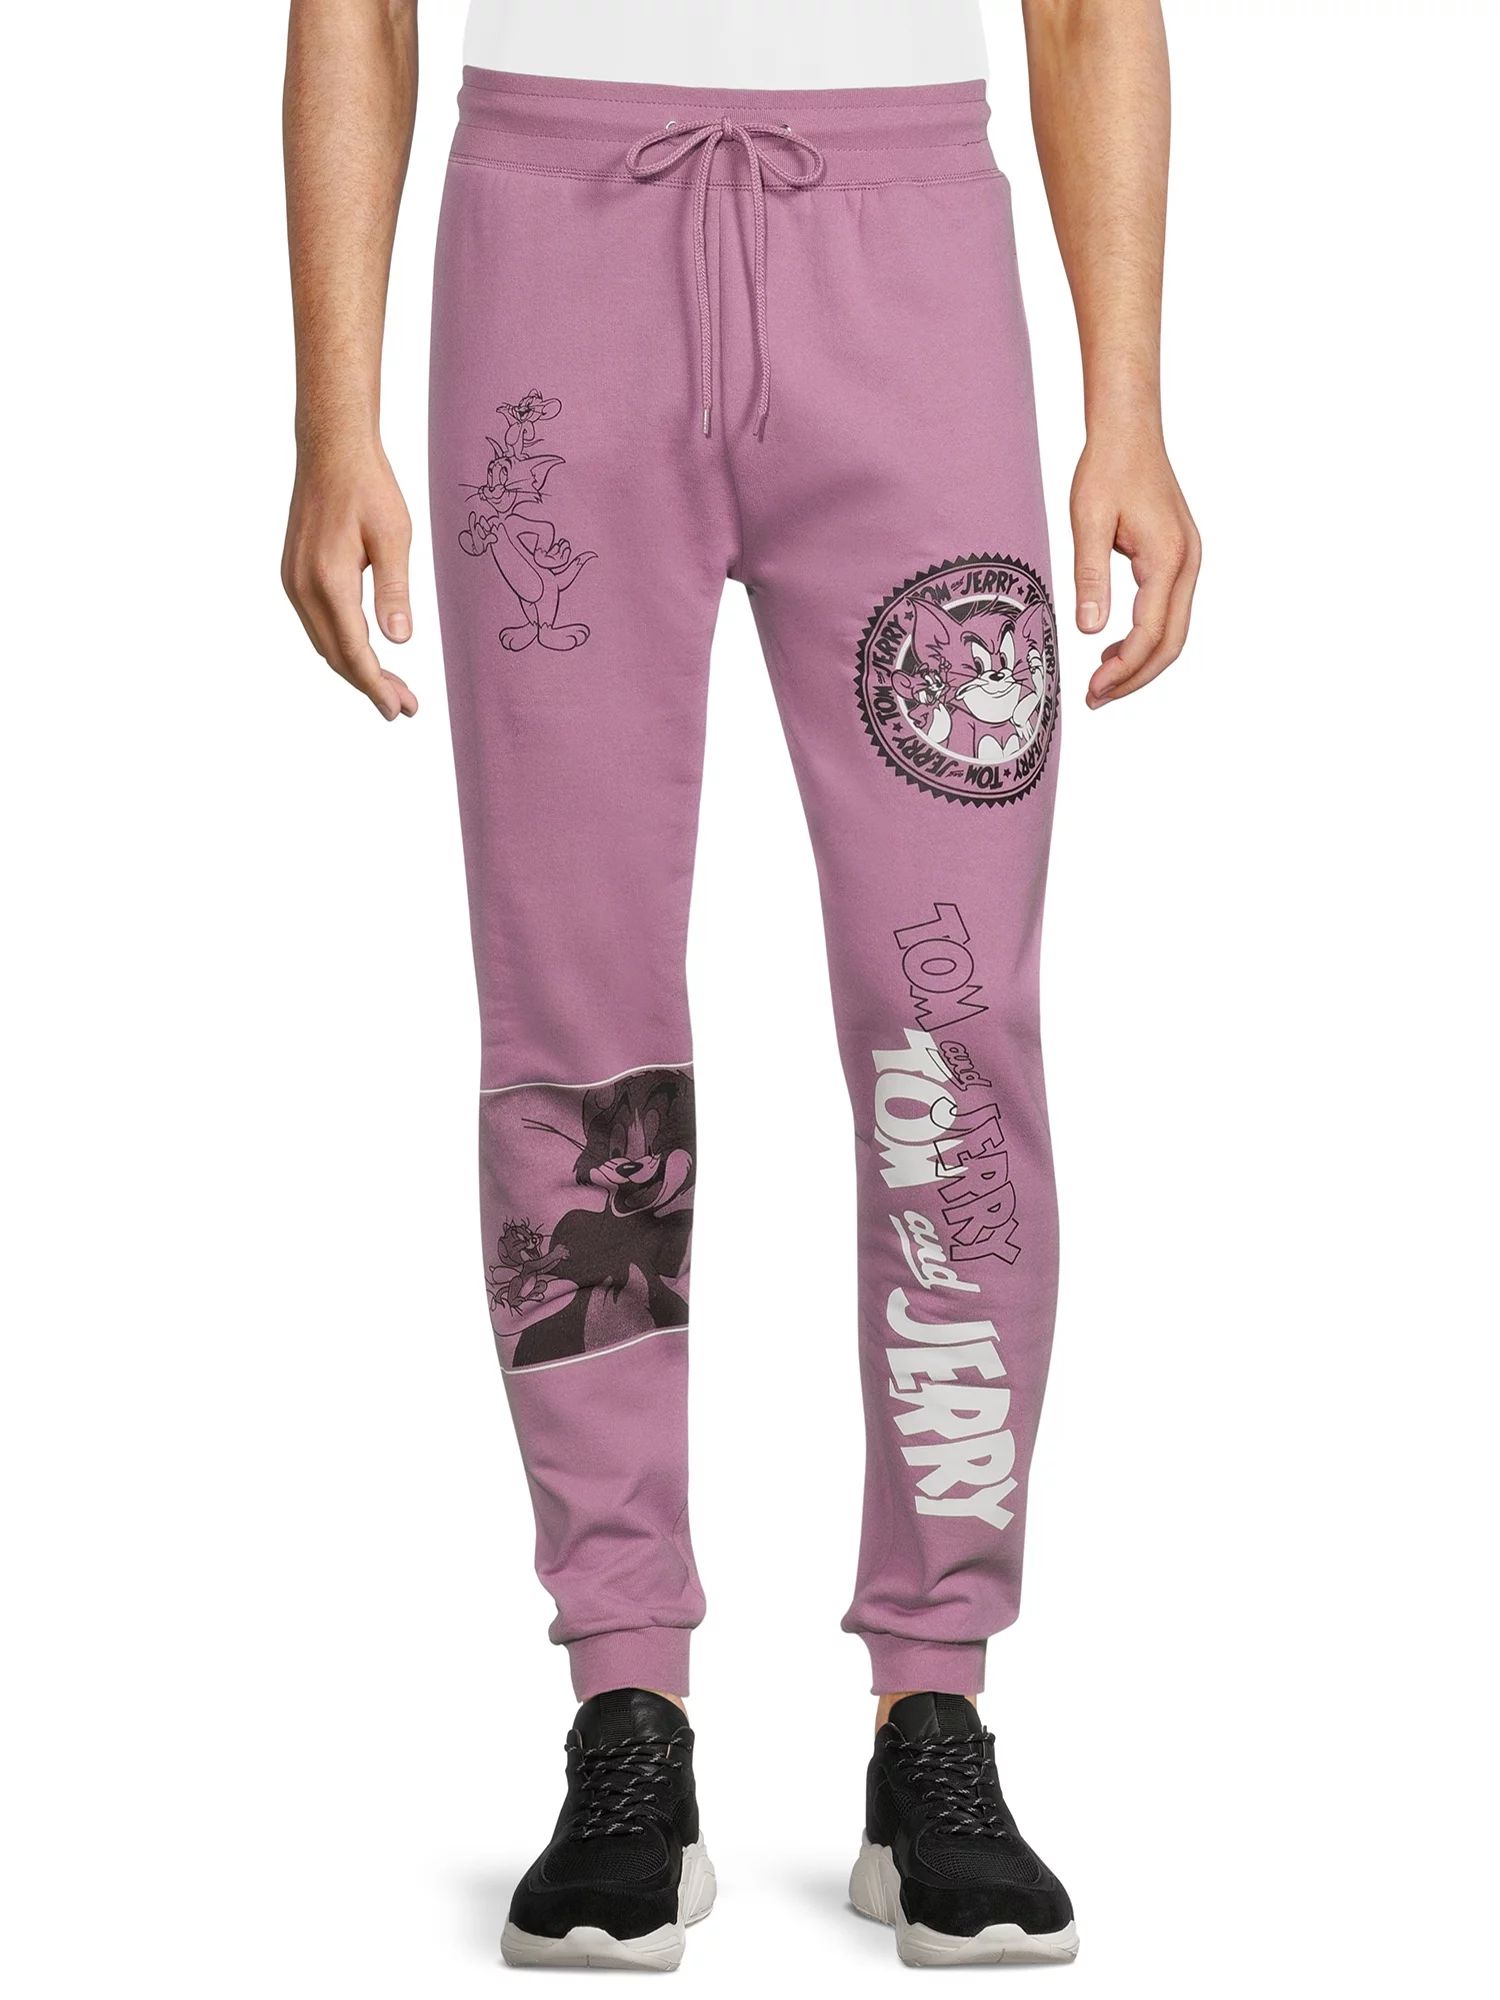 Tom and Jerry Men's Graphic Jogger Sweatpants, Sizes S-2XL | Walmart (US)